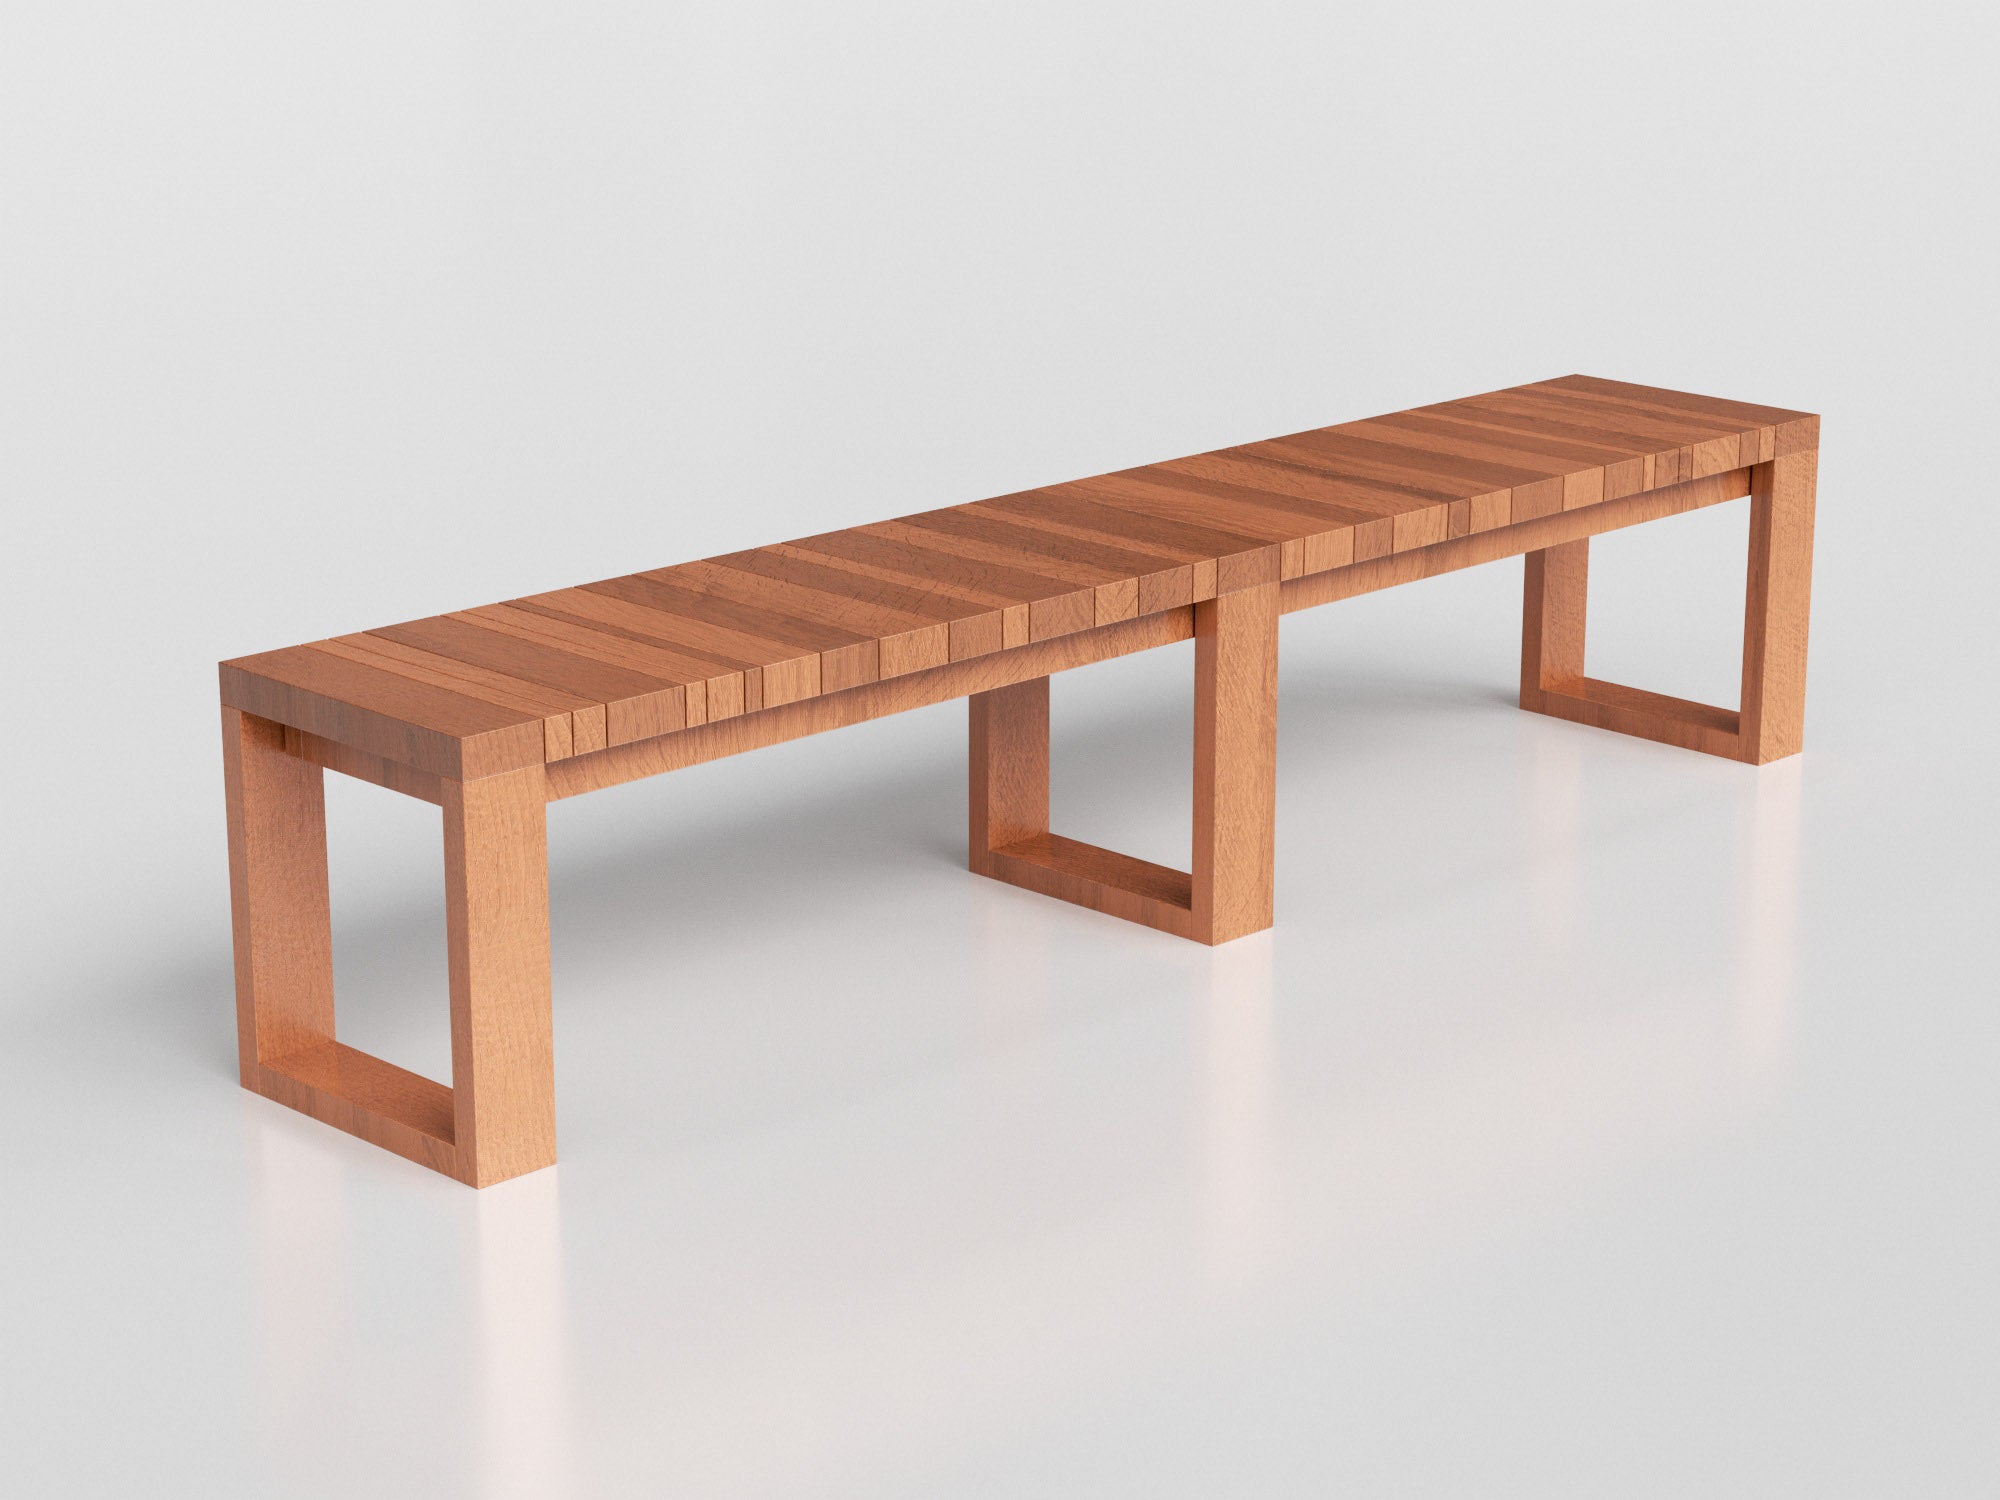 Fusion Bench Compact with wood estruture and top for outdoor areas, designed by Maria Candida Machado